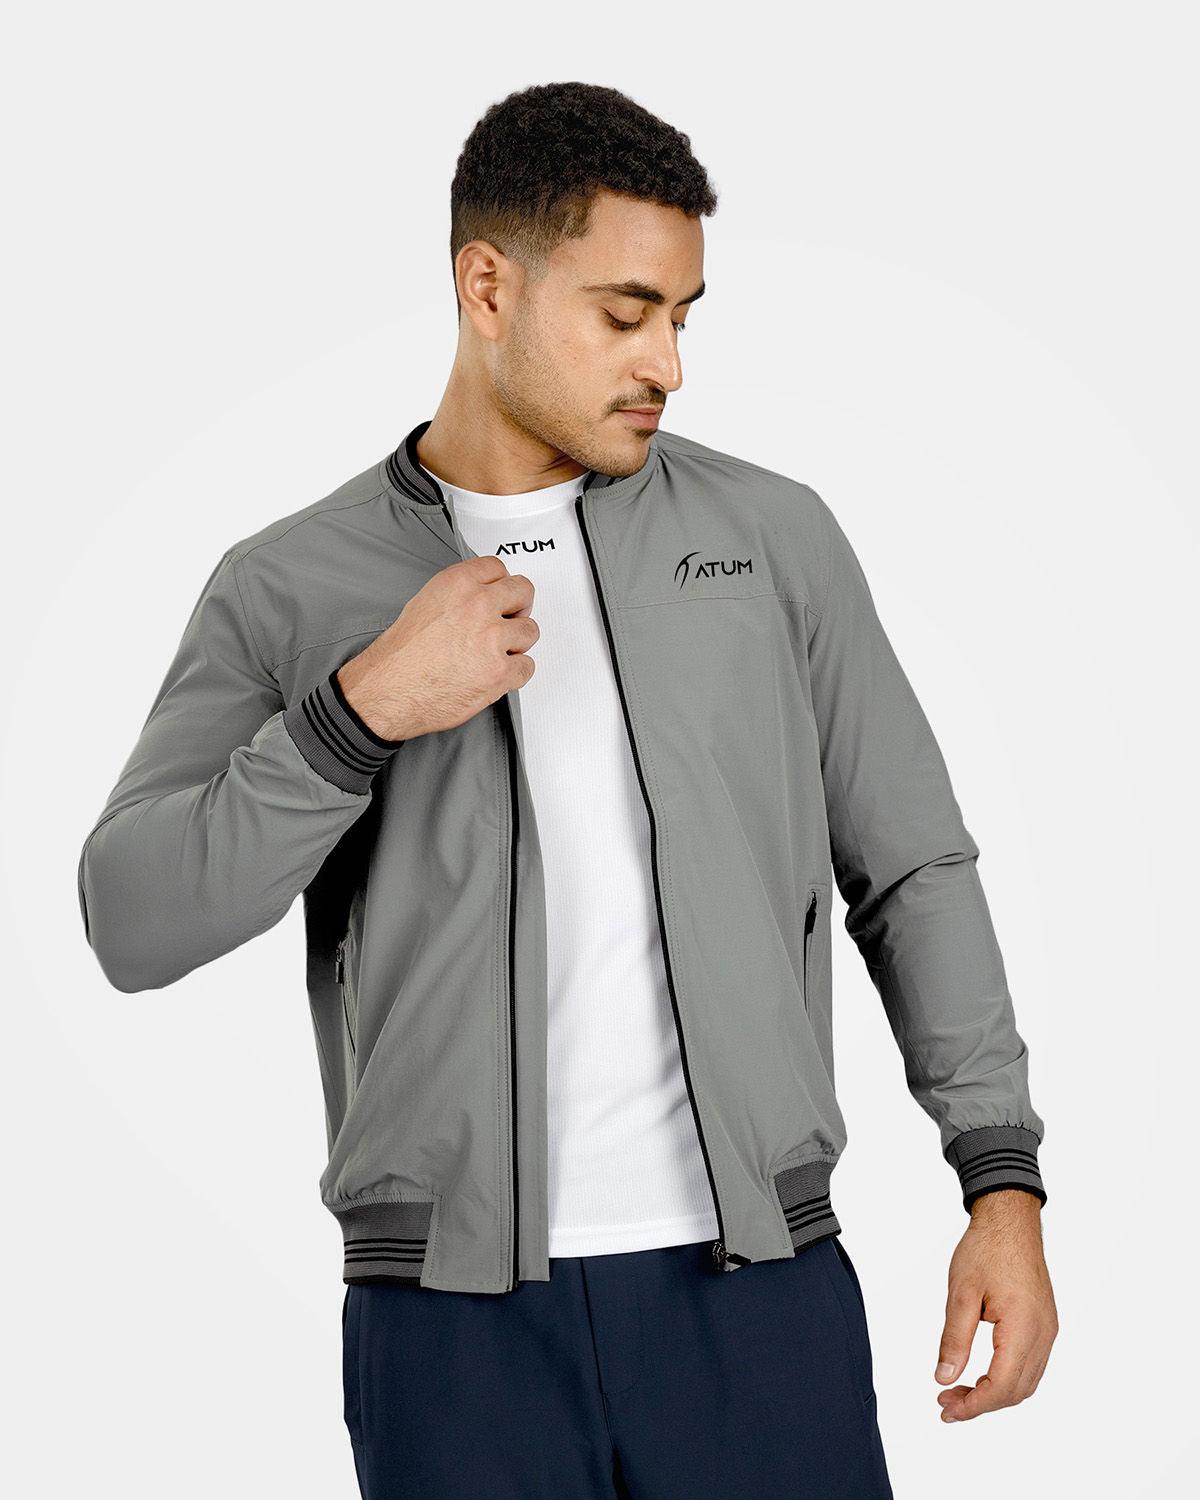 Photo by 𝗔𝗧𝗨ð�— SPORTSWEAR ® on December 20, 2022. May be an image of 1 man wear gray jacket with white basic t-shirt.